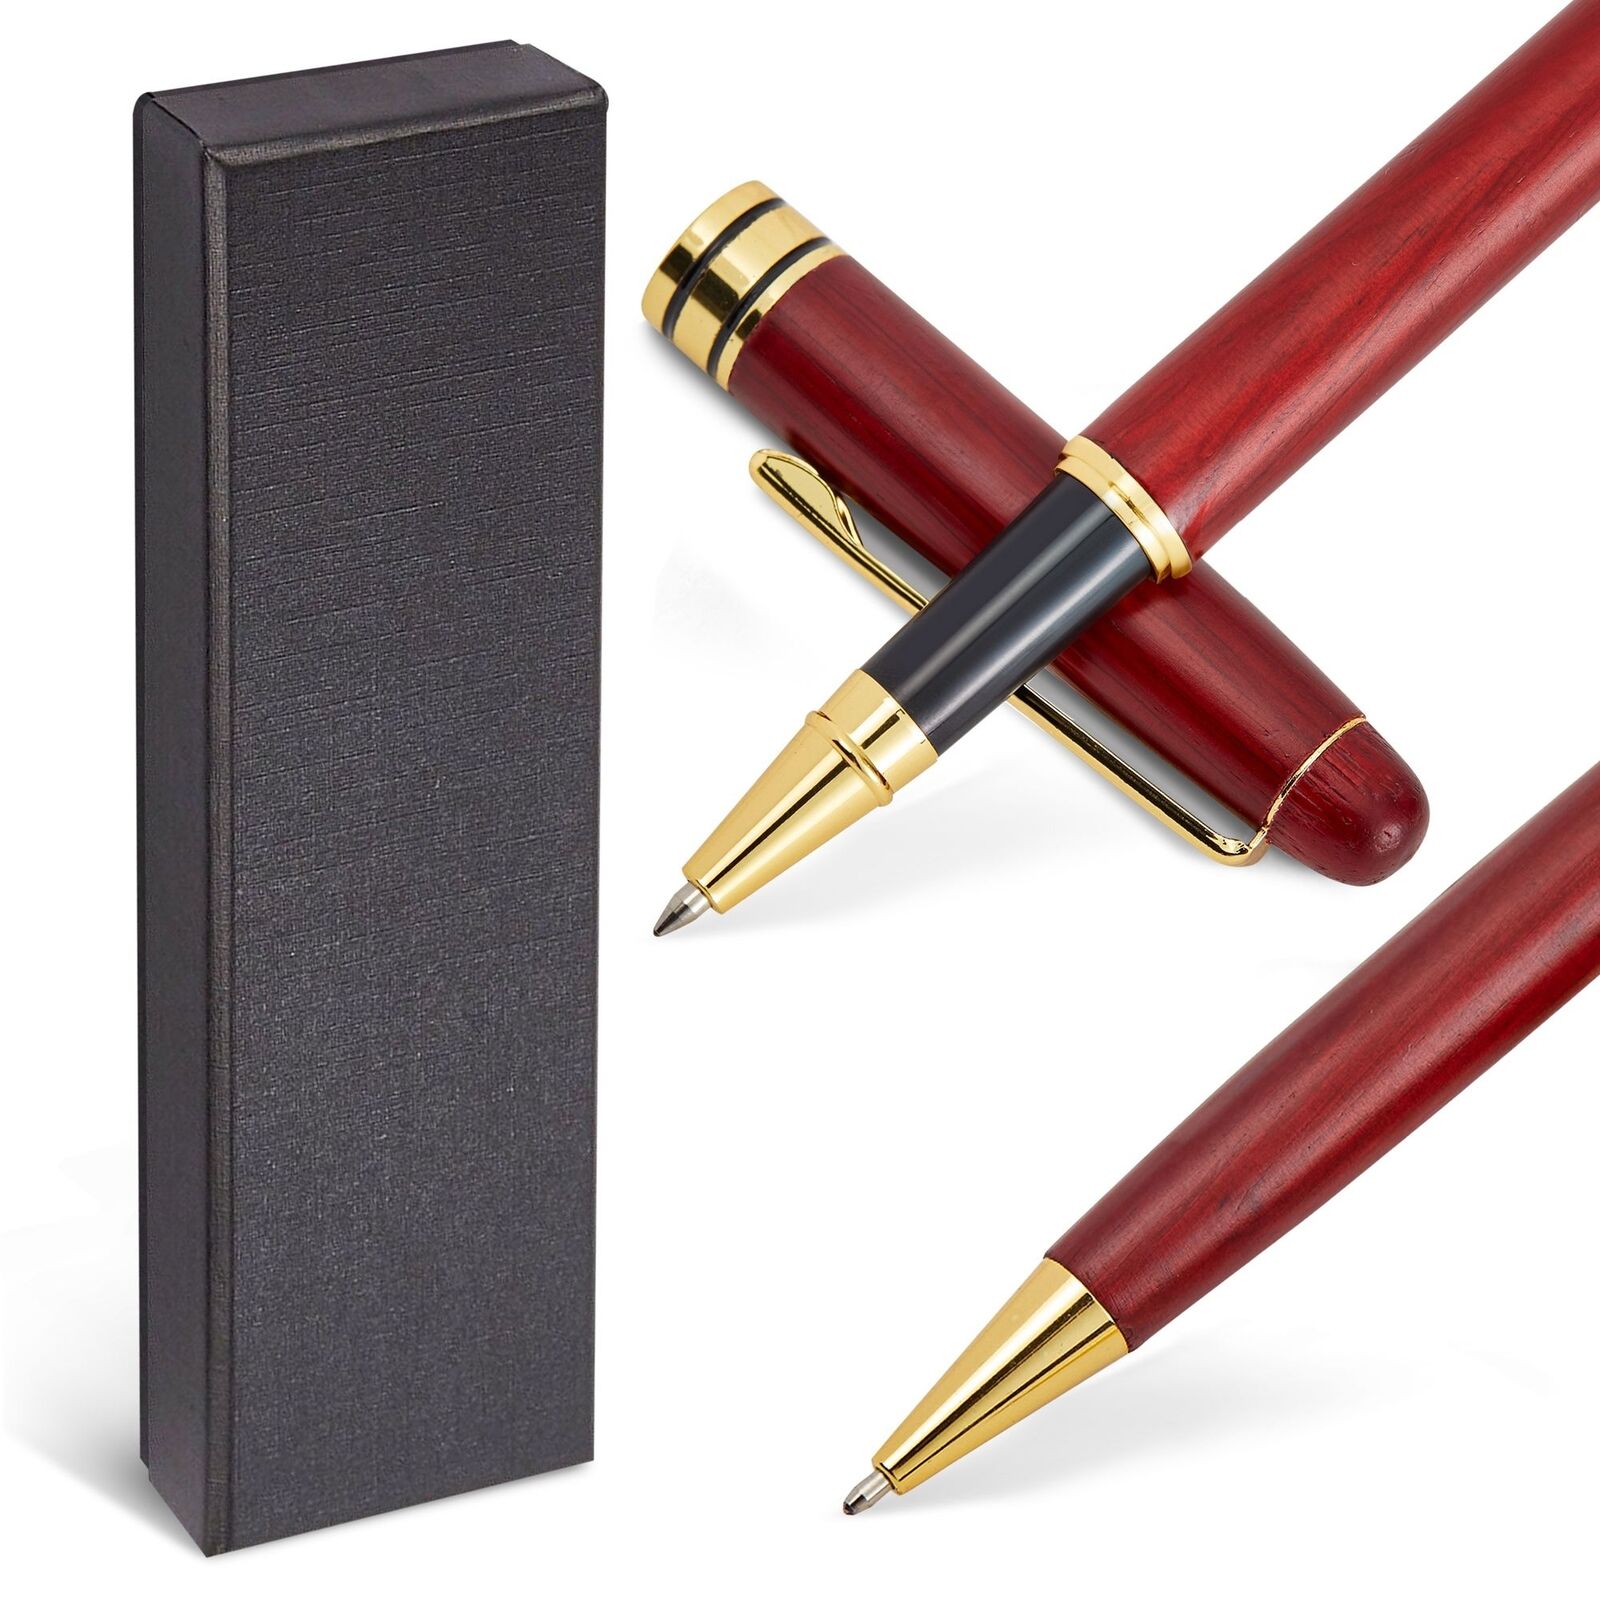 Rosewood Luxury Ballpoint Pen Gift Set of 2 with Box and 2 Black Ink Refills